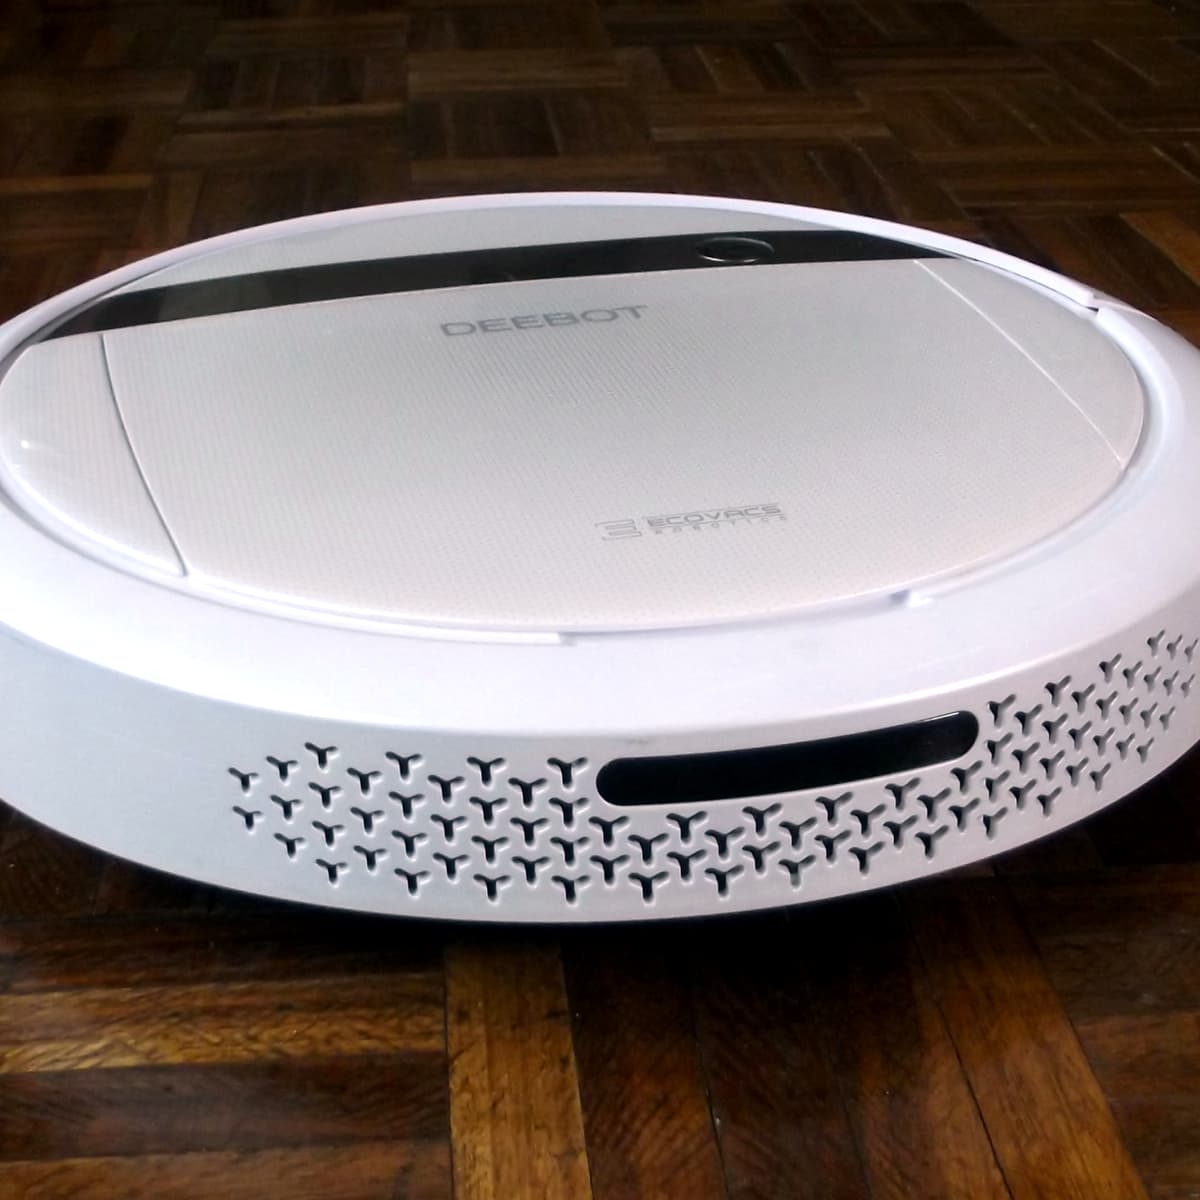 Review of the Ecovacs Deebot M88 Robotic Vacuum Cleaner